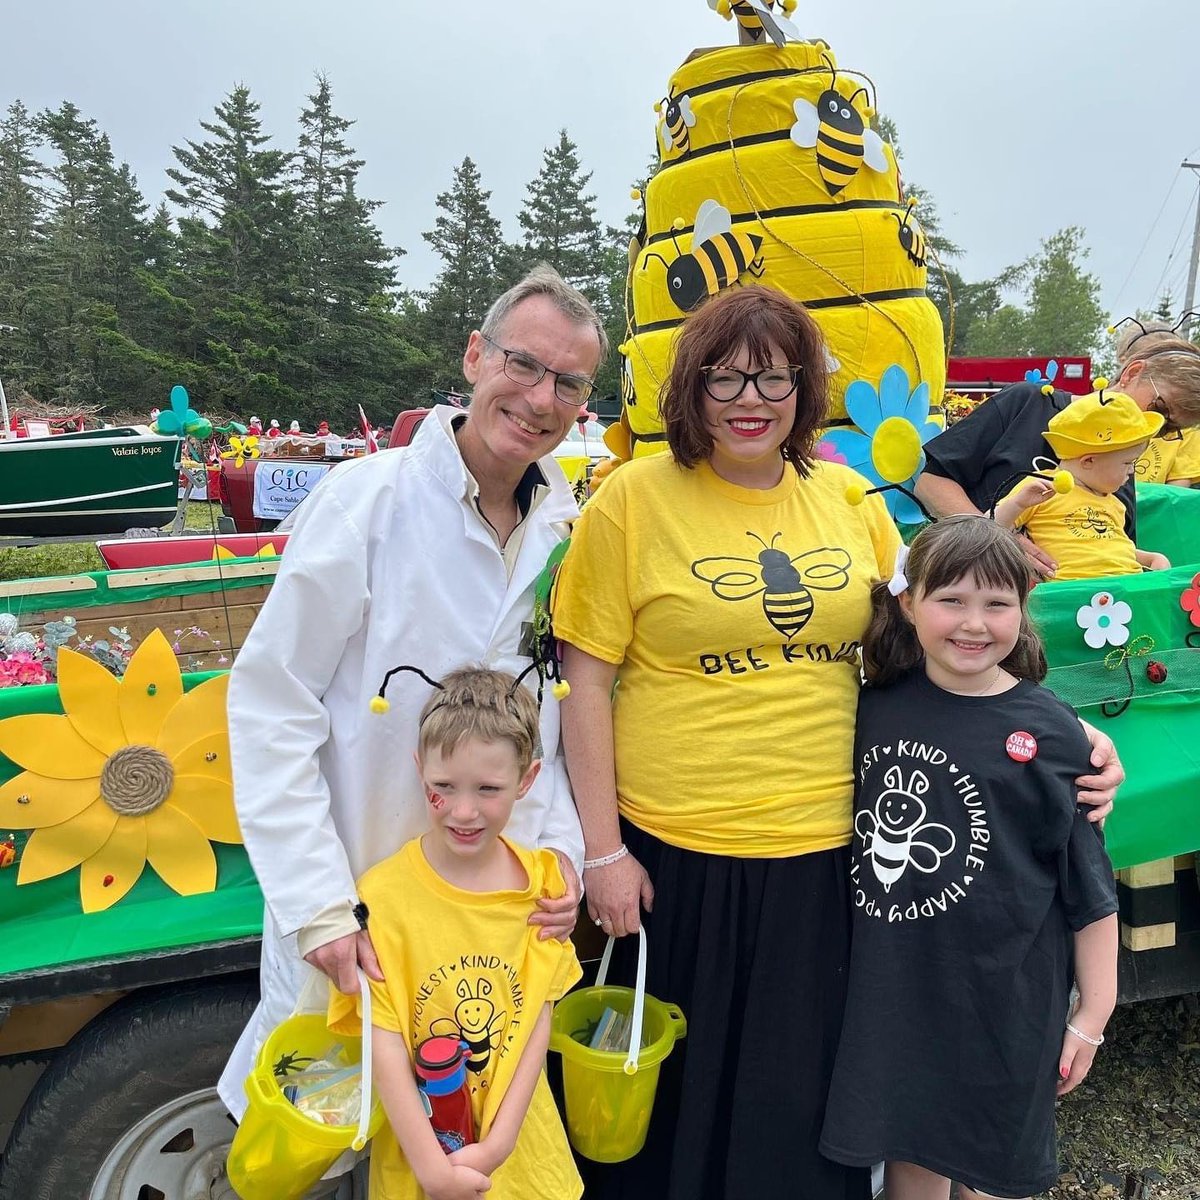 Nicole Nickerson values every moment spent with her young family. After two heart attacks, Nicole received care at the QEII from Dr. Sharon Mulvagh and the team at the Maritime Heart Centre’s Women’s Heart Health Clinic. 💜 Read the story: bit.ly/3Rl2GJT